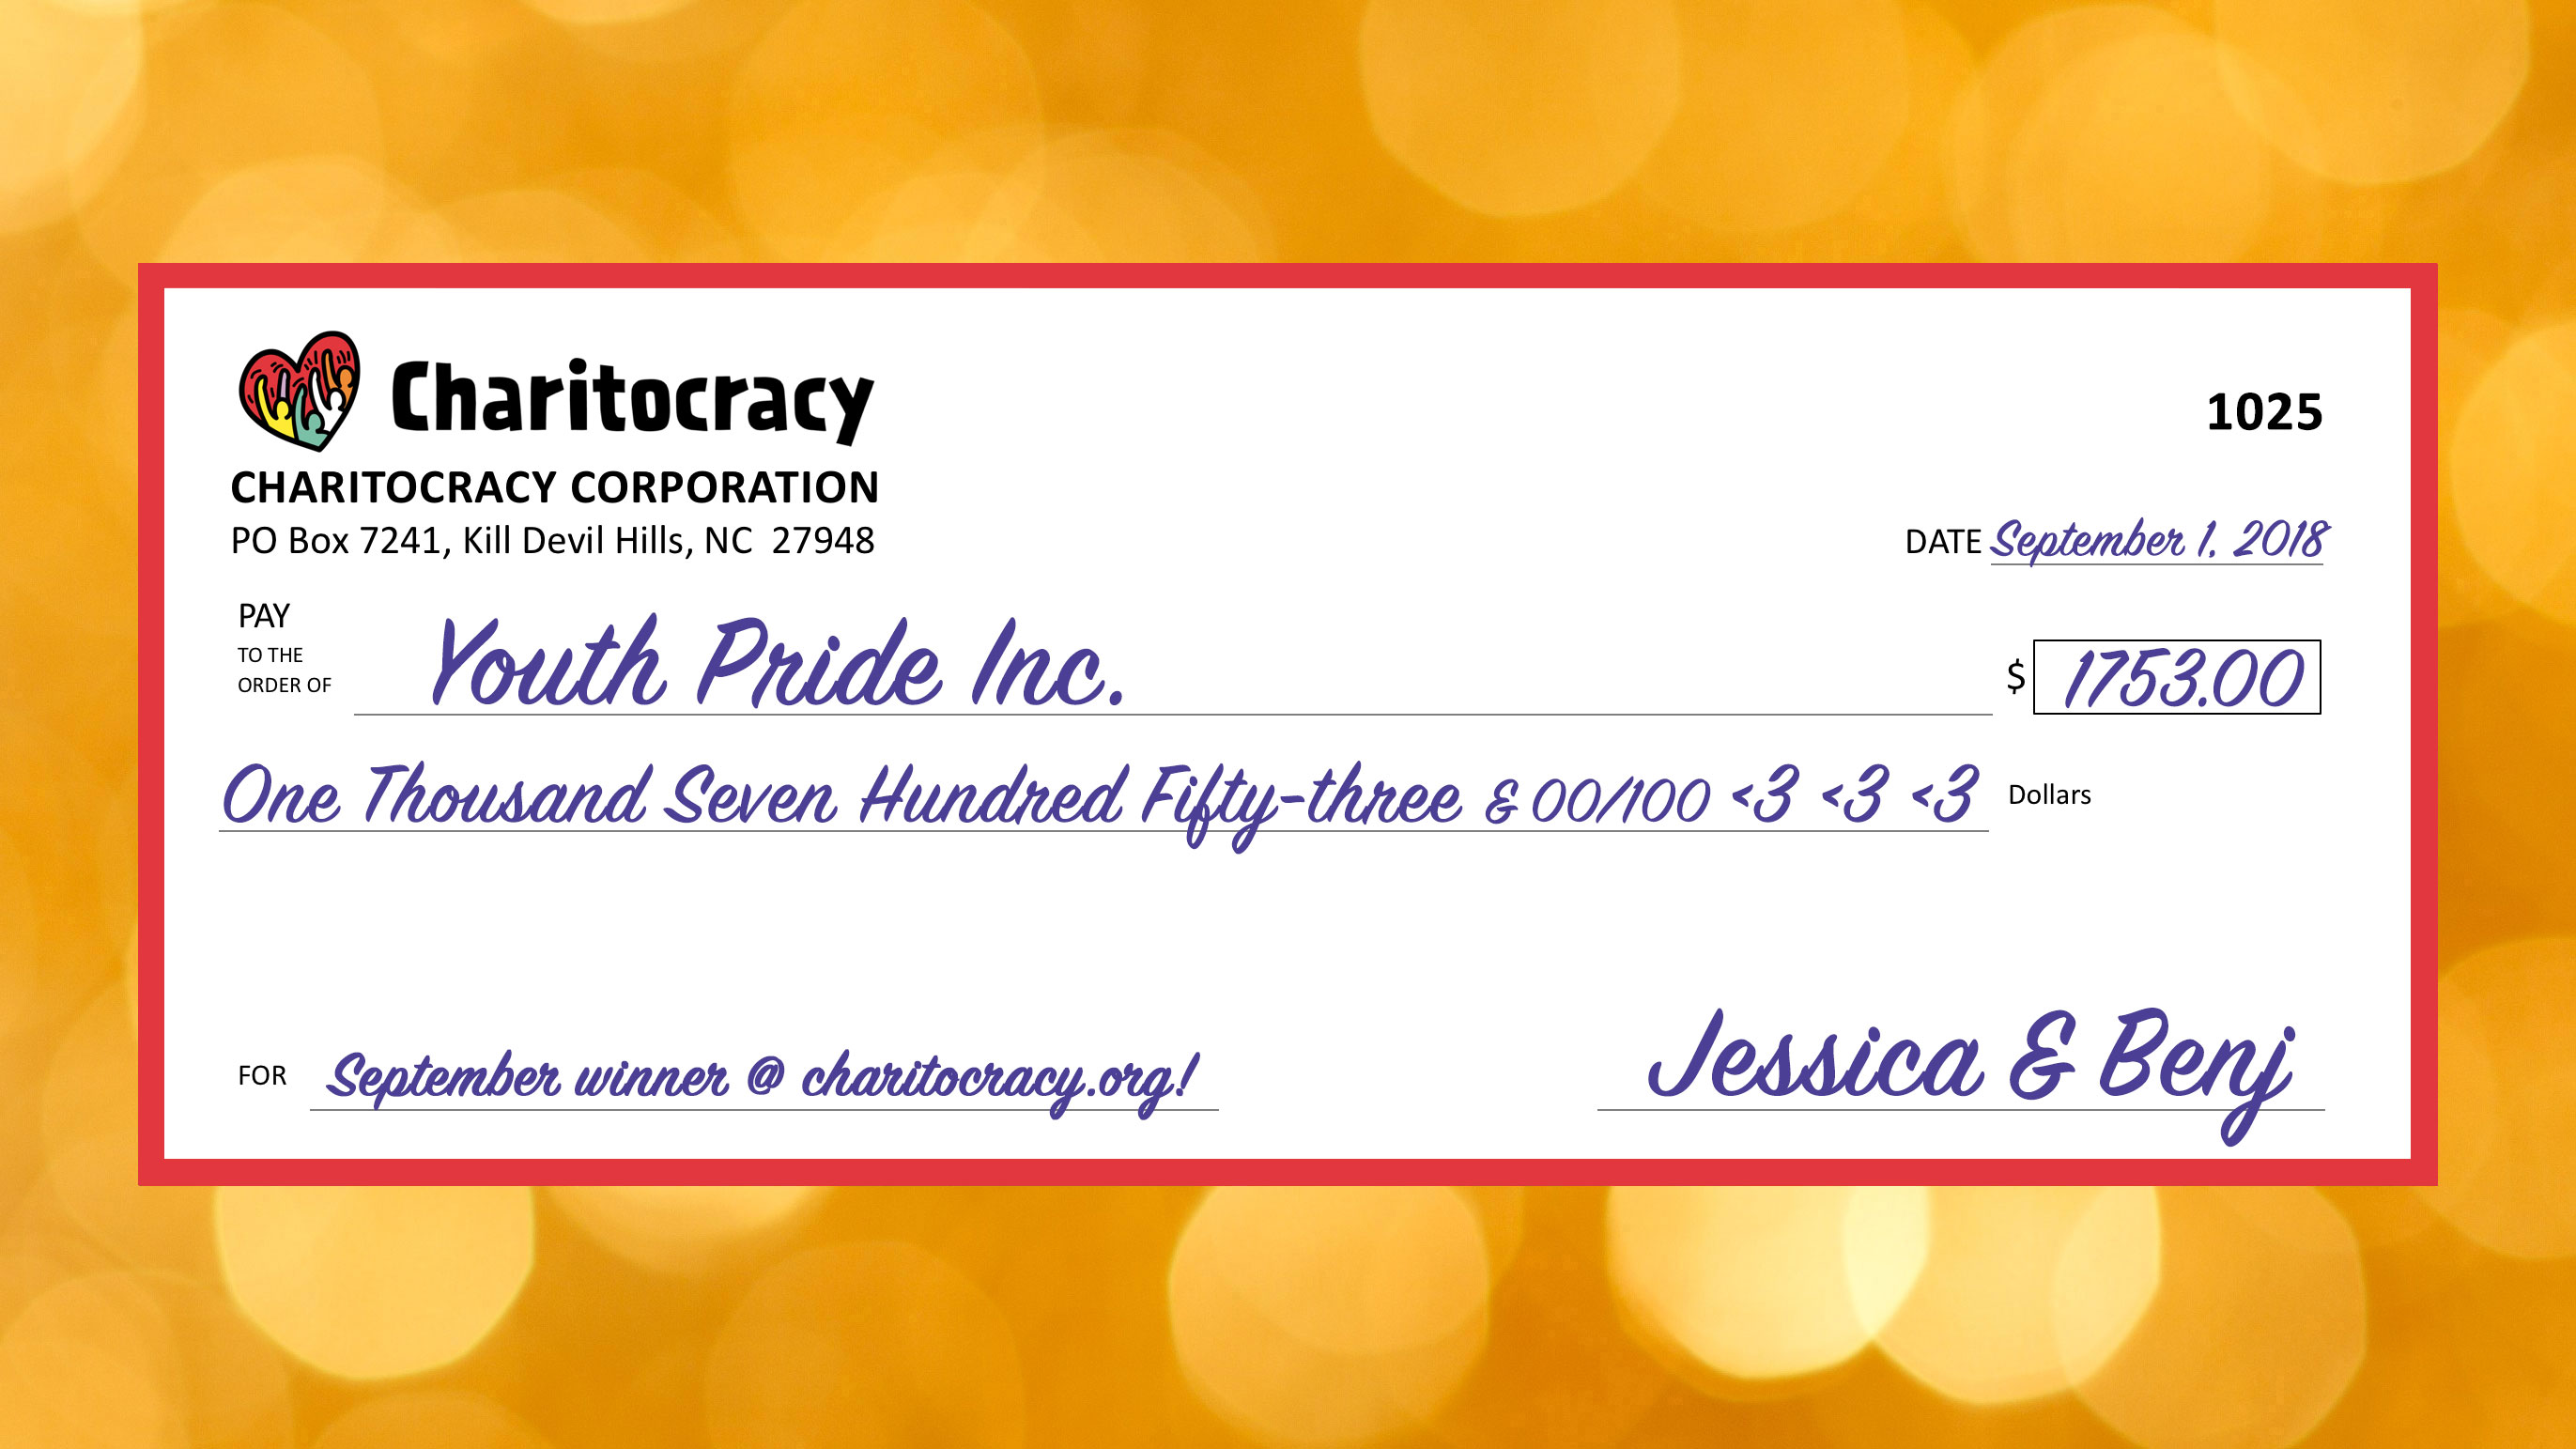 Charitocracy's 25th check to September winner Youth Pride Inc. for $1753